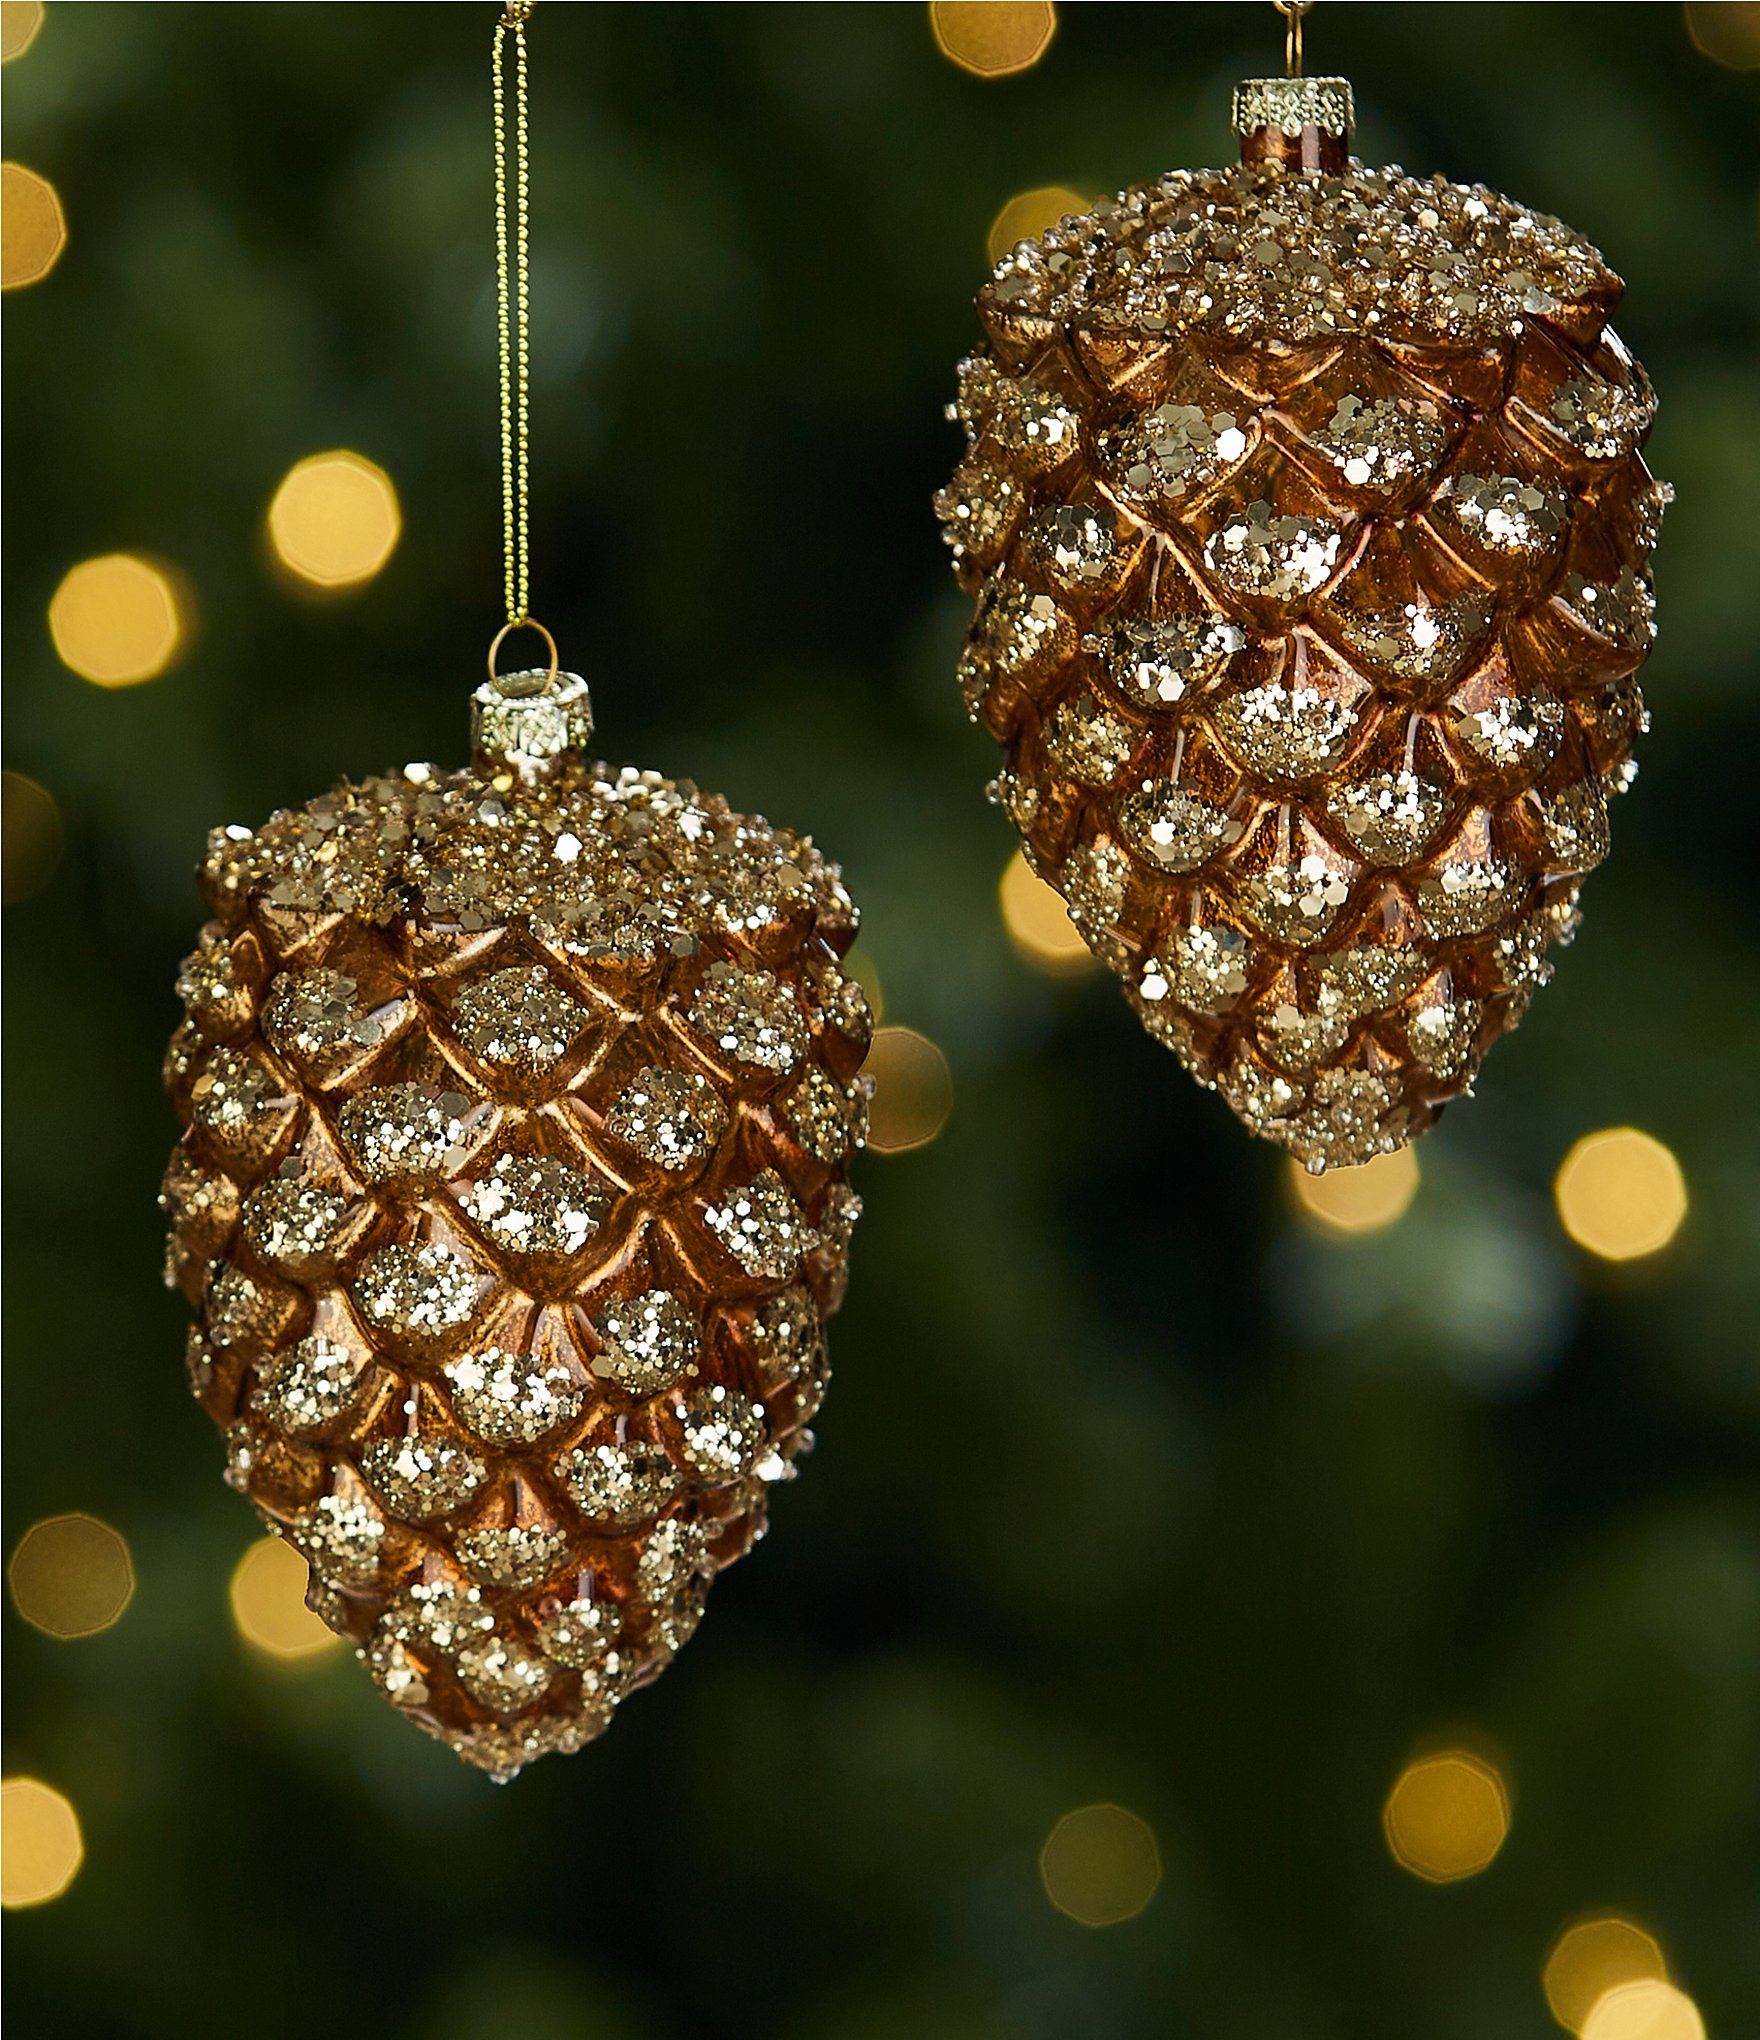 https://dimg.dillards.com/is/image/DillardsZoom/zoom/southern-living-forest-fantasy-collection-gold-glittered-glass-pinecone-ornament-2-piece-set/00000000_zi_20386703.jpg